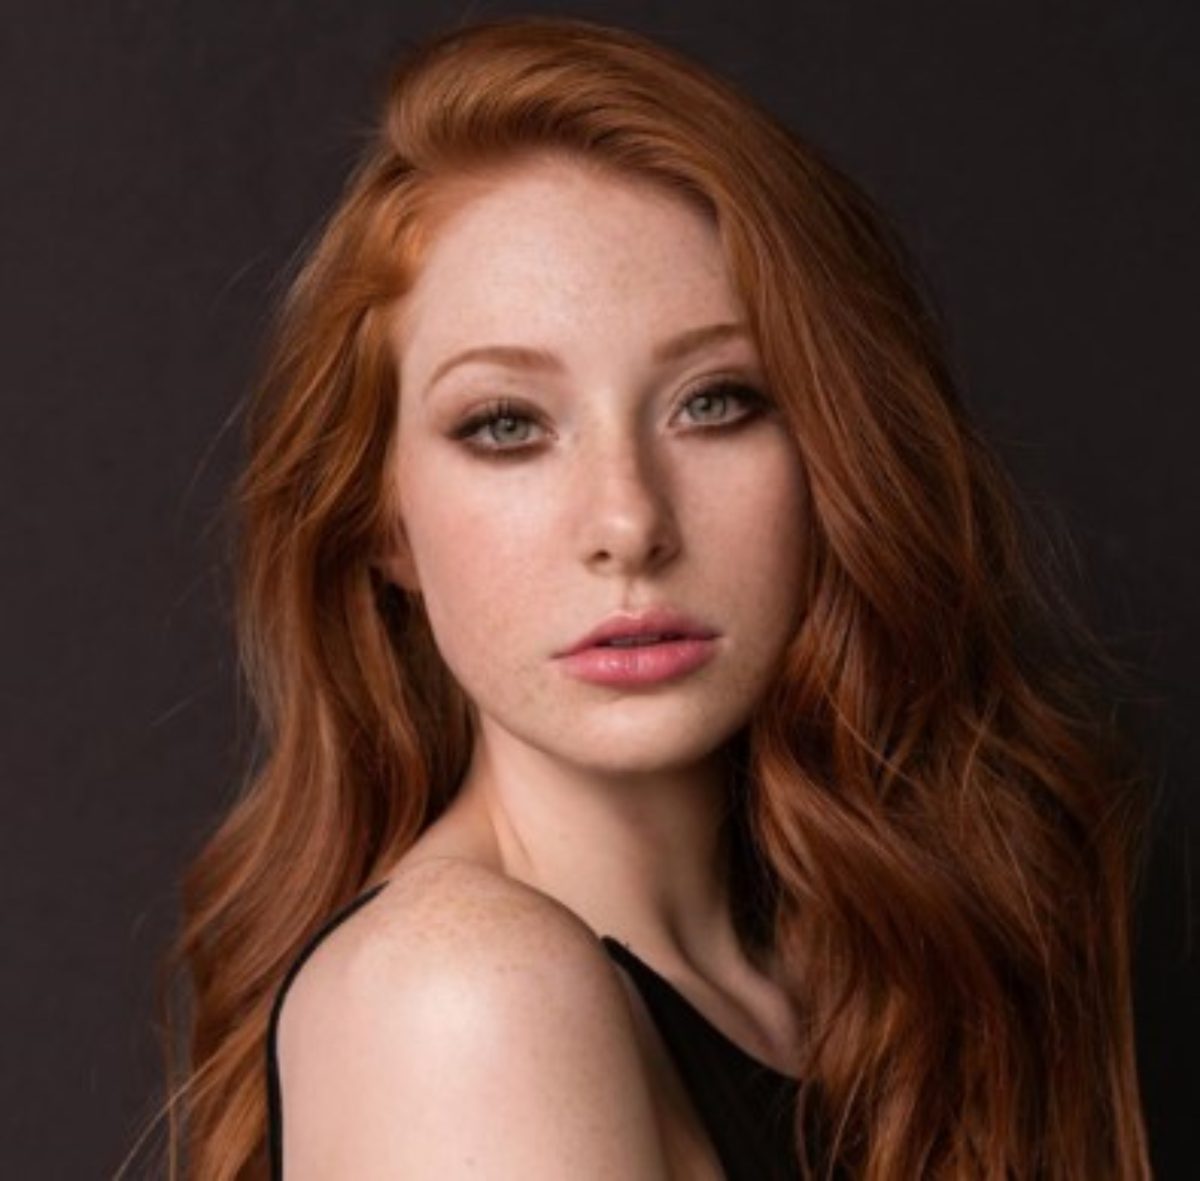 Madeline Ford, A Redhair Beauty With Freckles